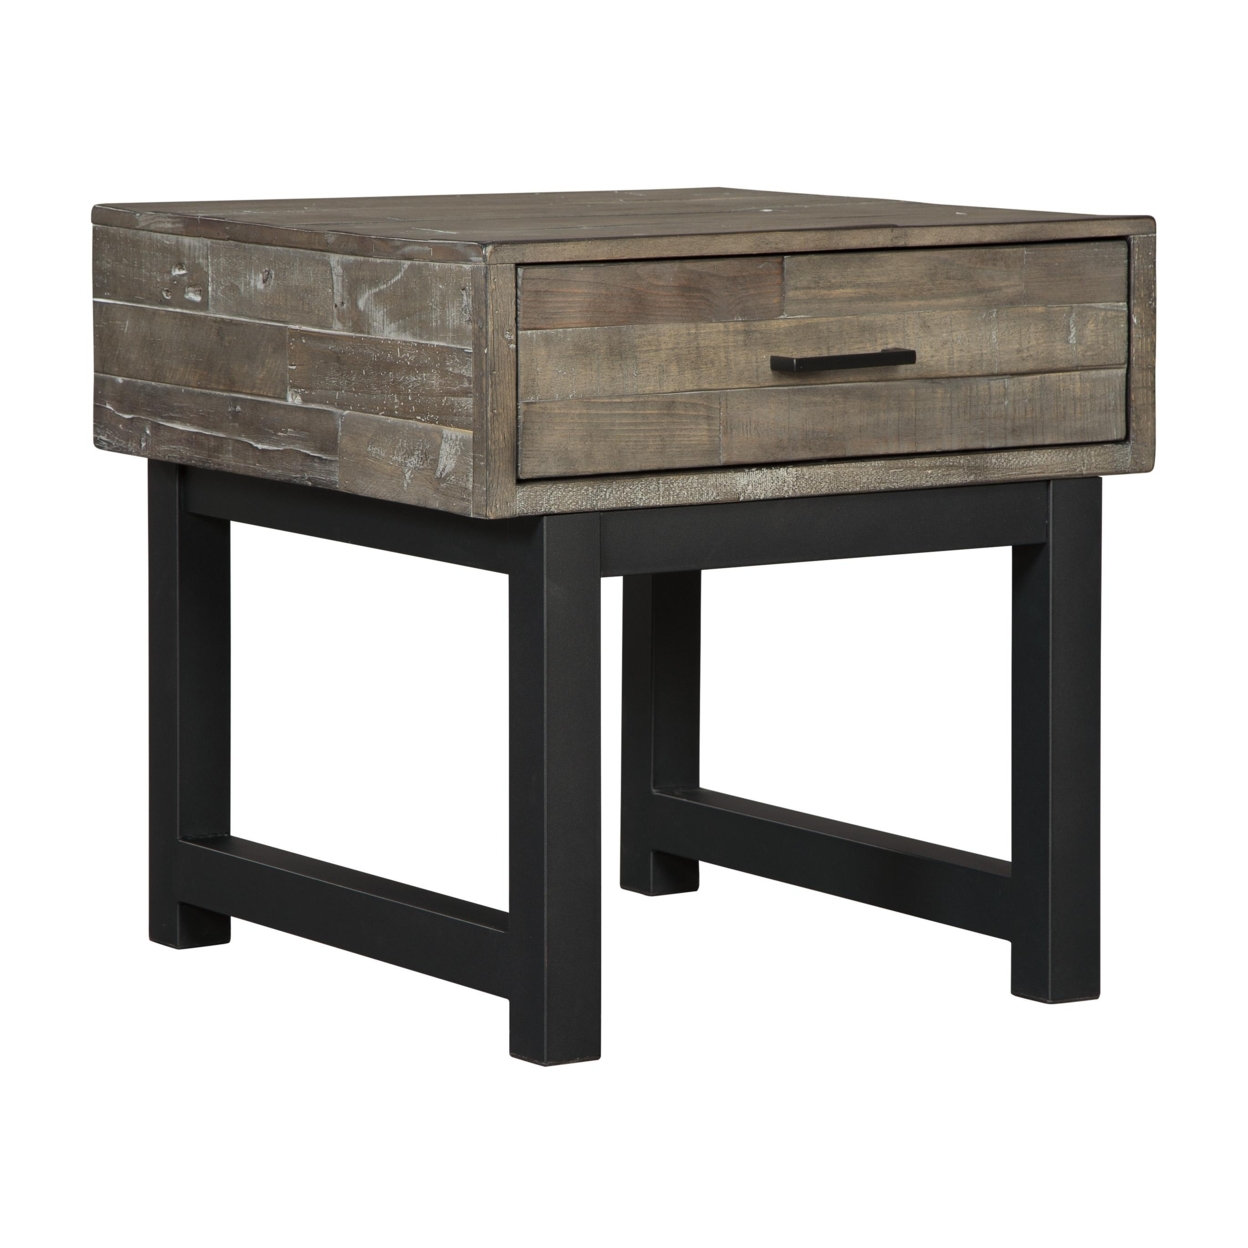 Square Butcher Block Wooden End Table With 1 Drawer, Brown And Black- Saltoro Sherpi